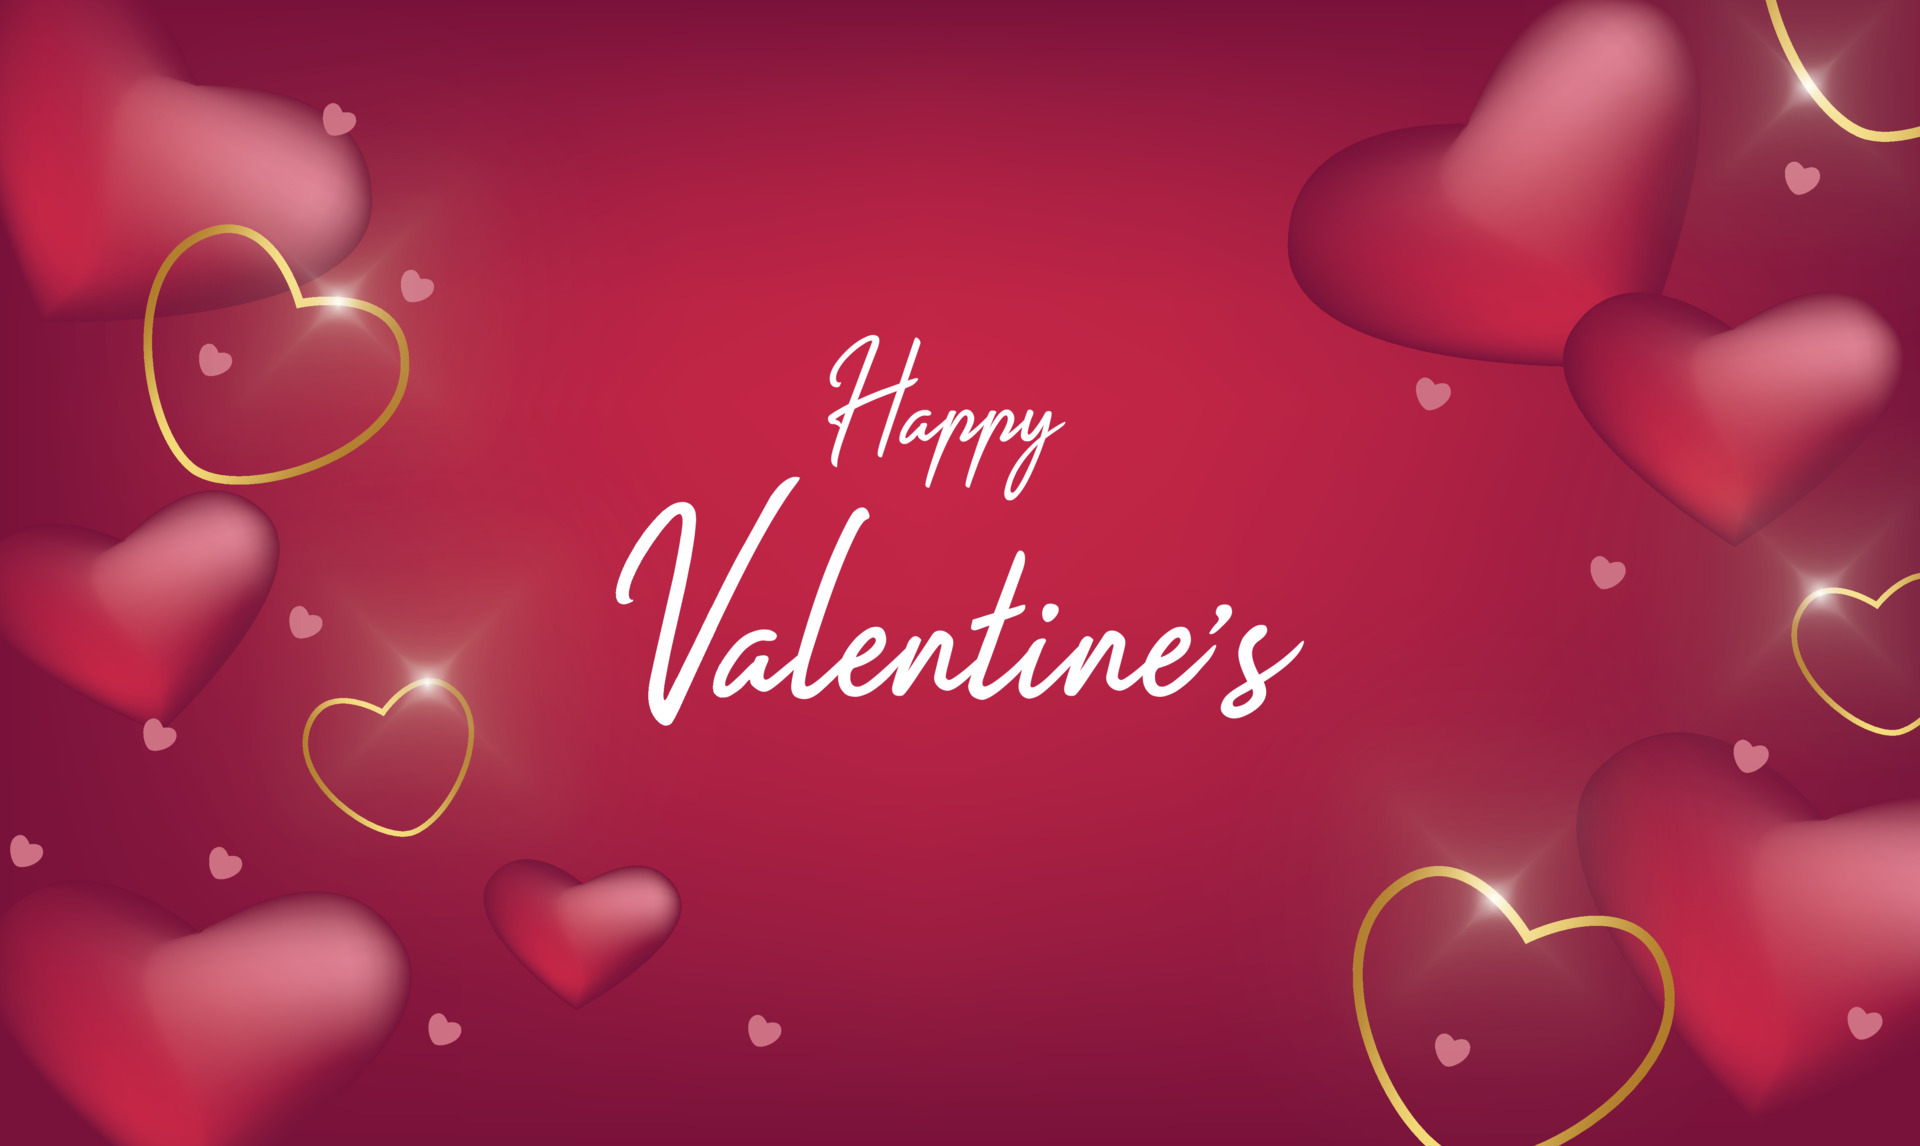 Valentines day pictures 1080P 2K 4K 5K HD wallpapers free download   Wallpaper Flare